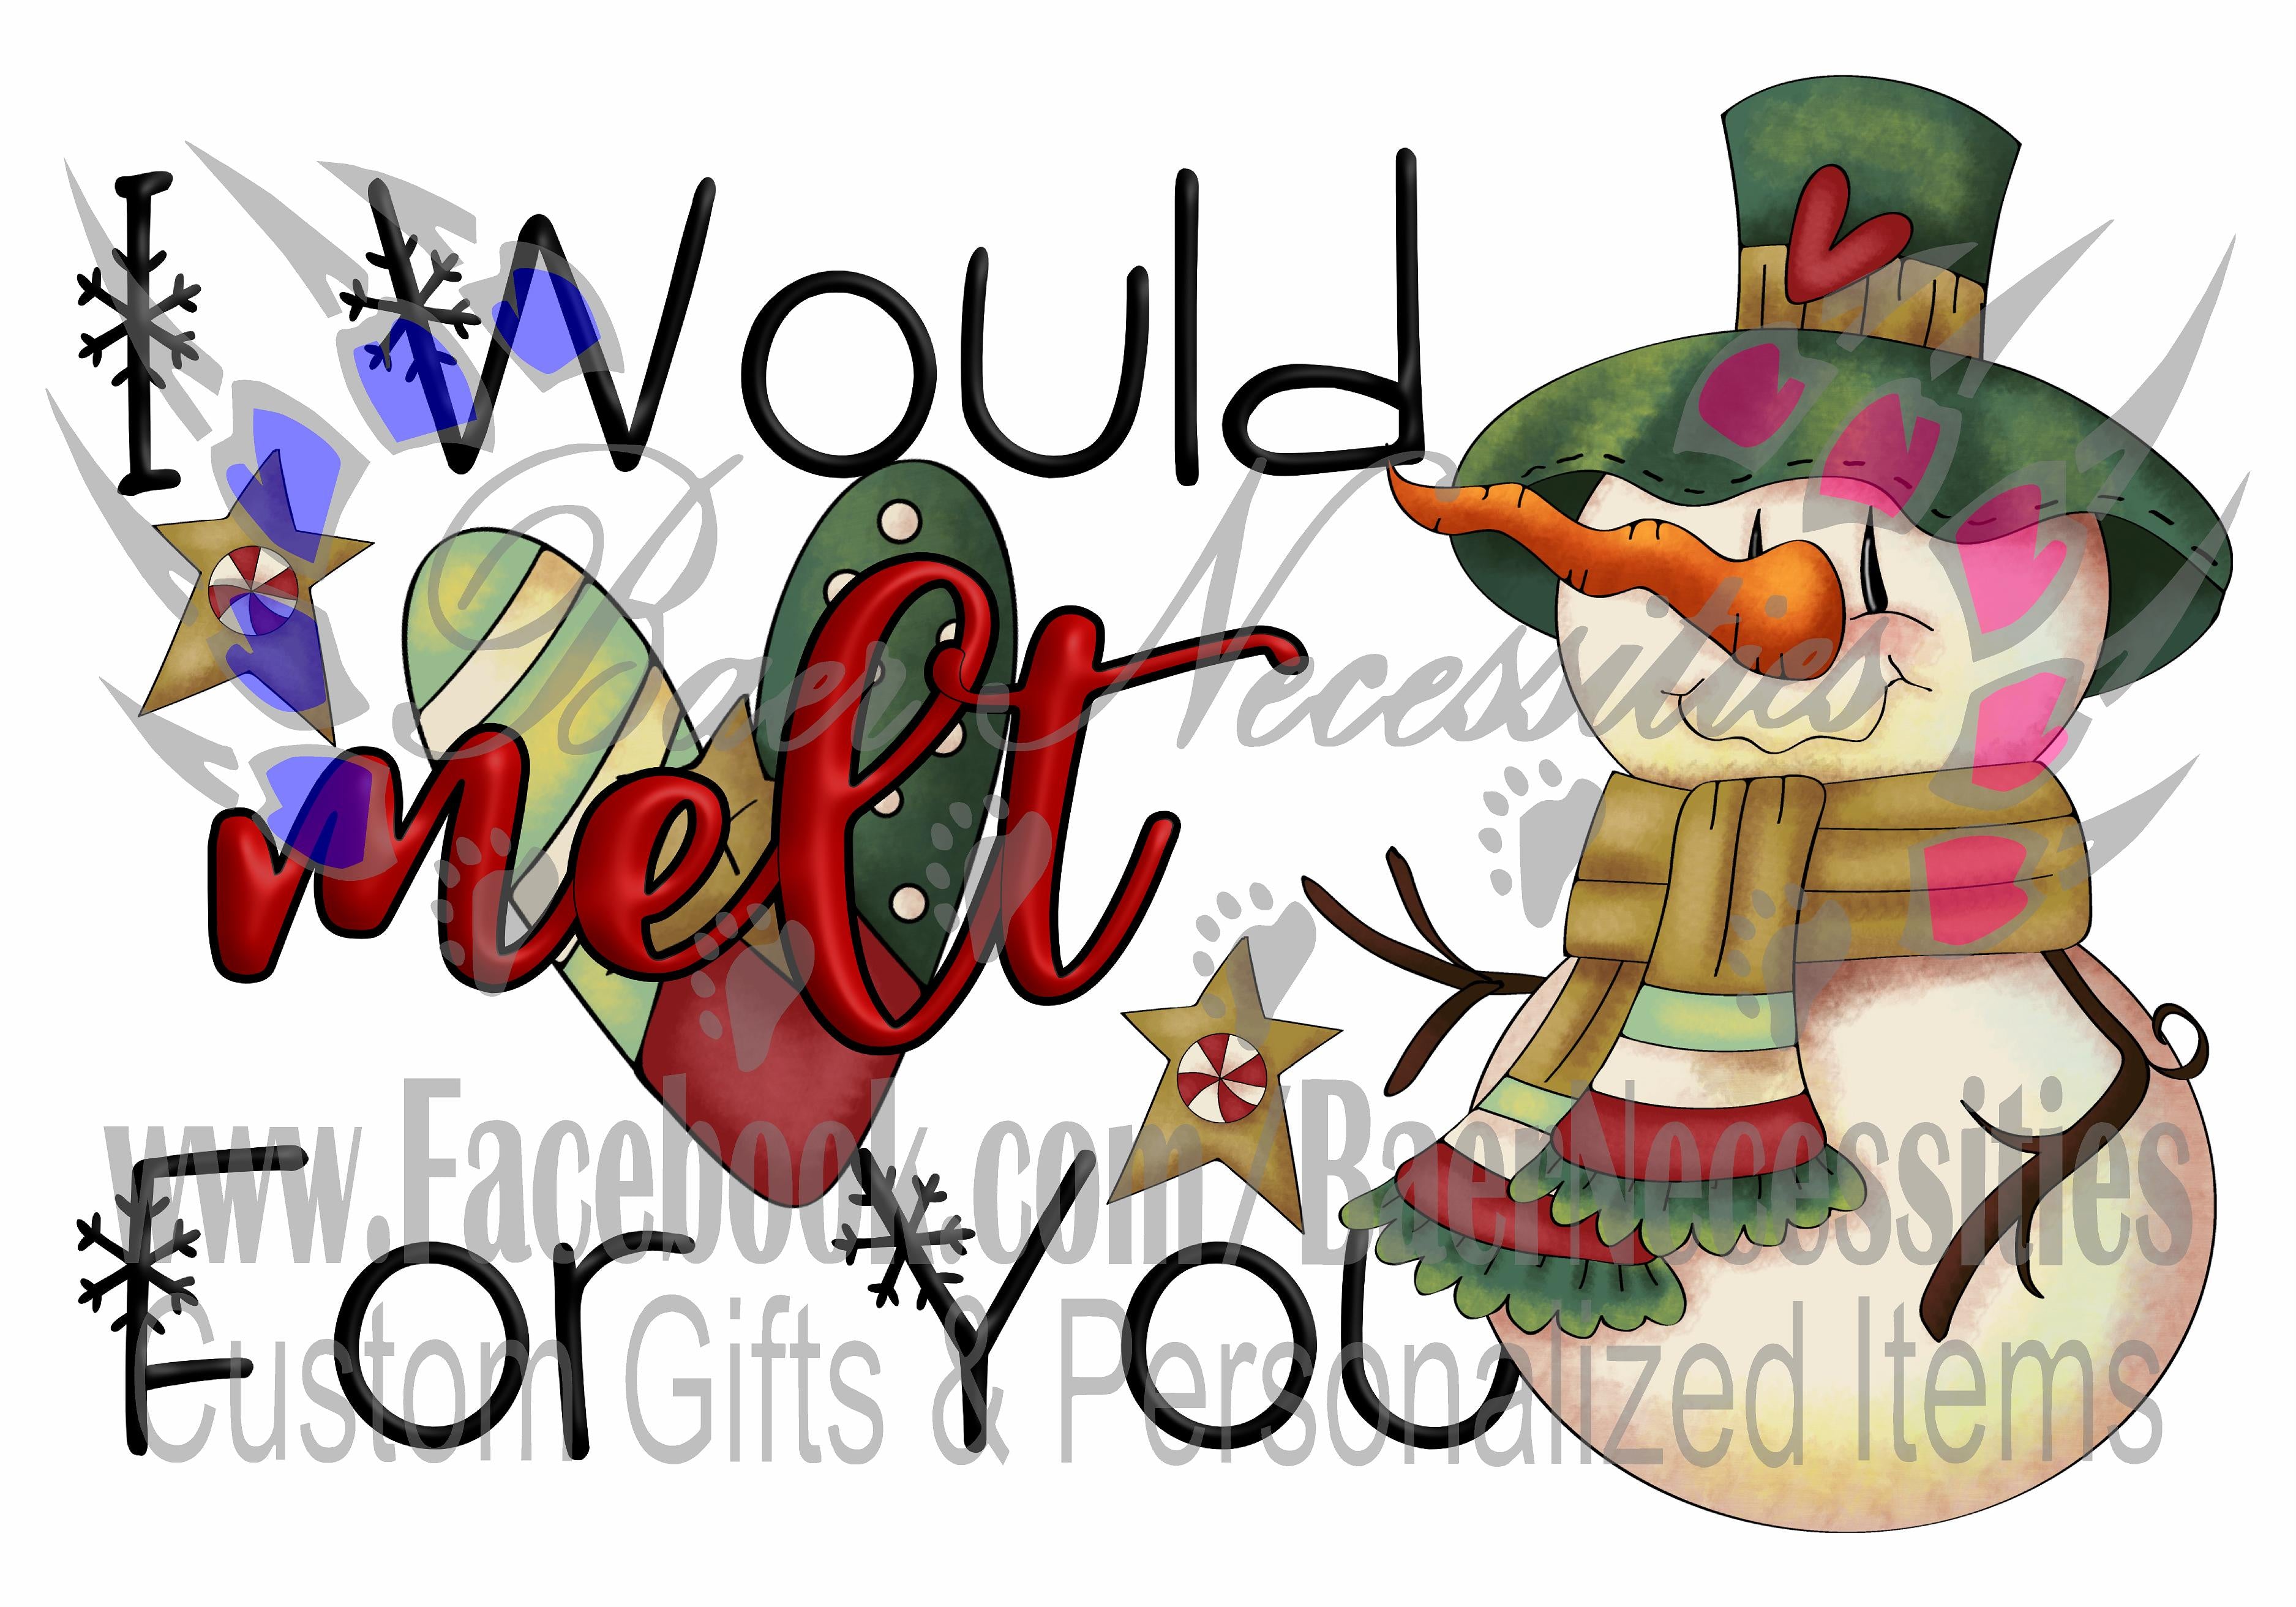 Snowman with Hat and Scarf Sticker – Big Moods